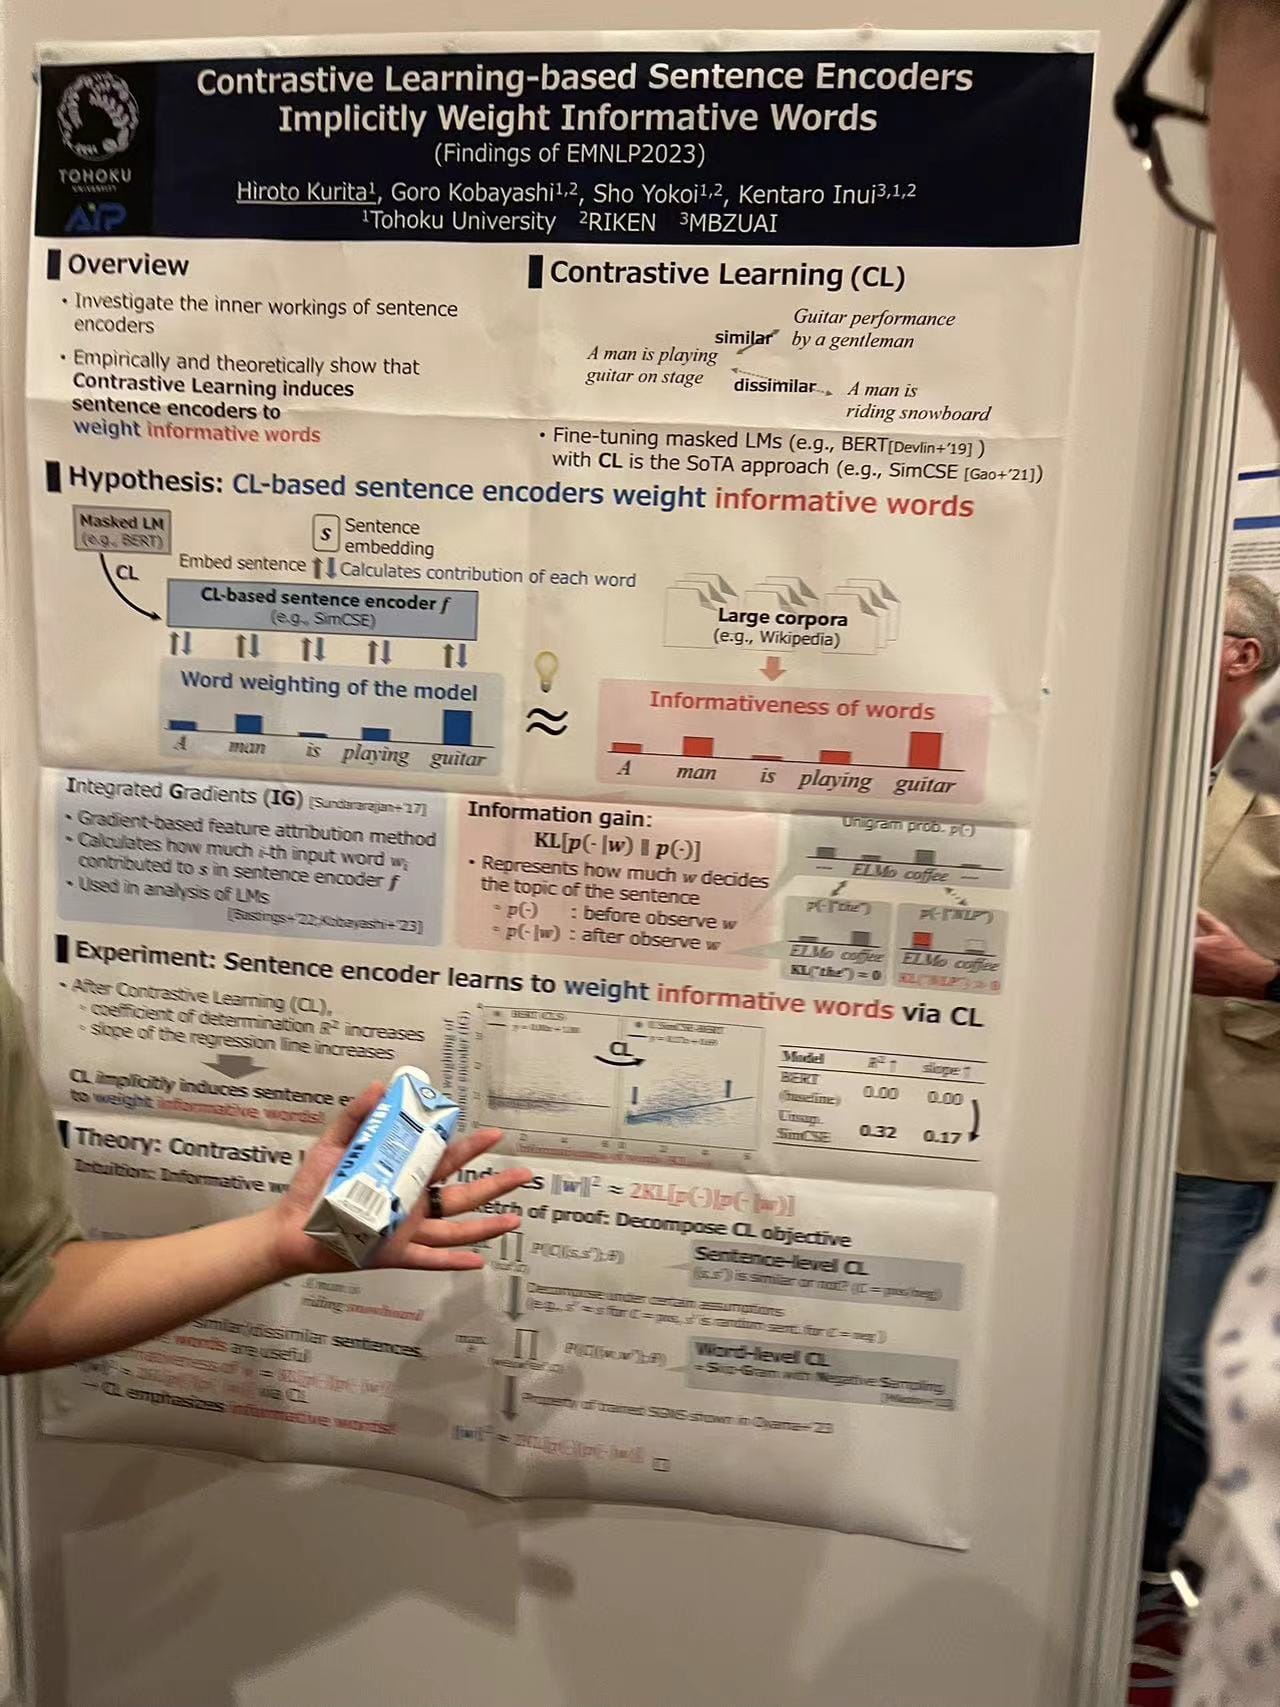 Researcher presenting an academic poster titled "Contrastive Learning-based Sentence Encoders Implicitly Weight Informative Words" at EMNLP 2023